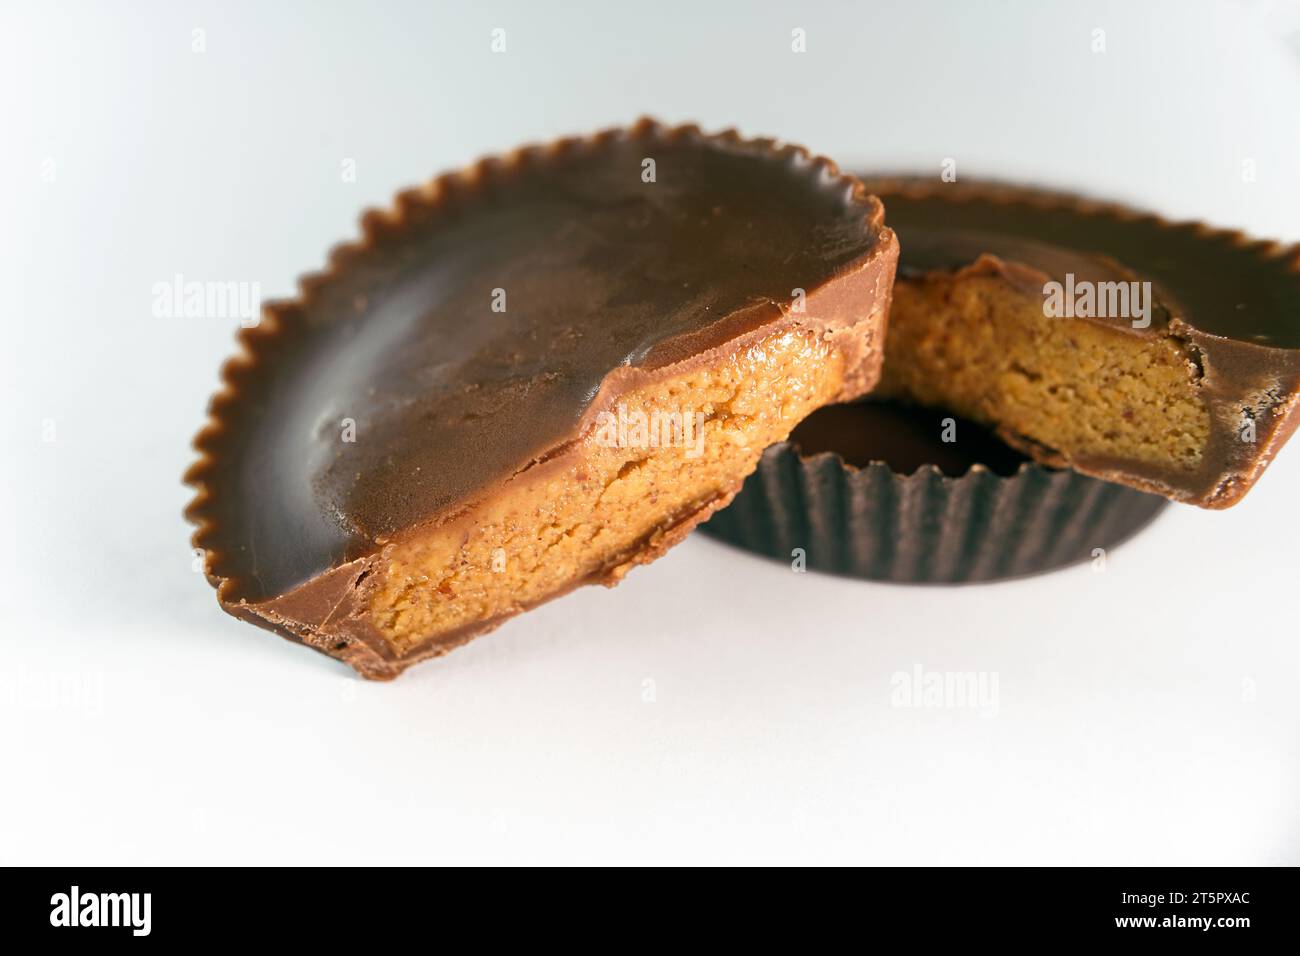 Macro shot of Peanut butter filled candy with chocolate frosting isolated on white background Stock Photo